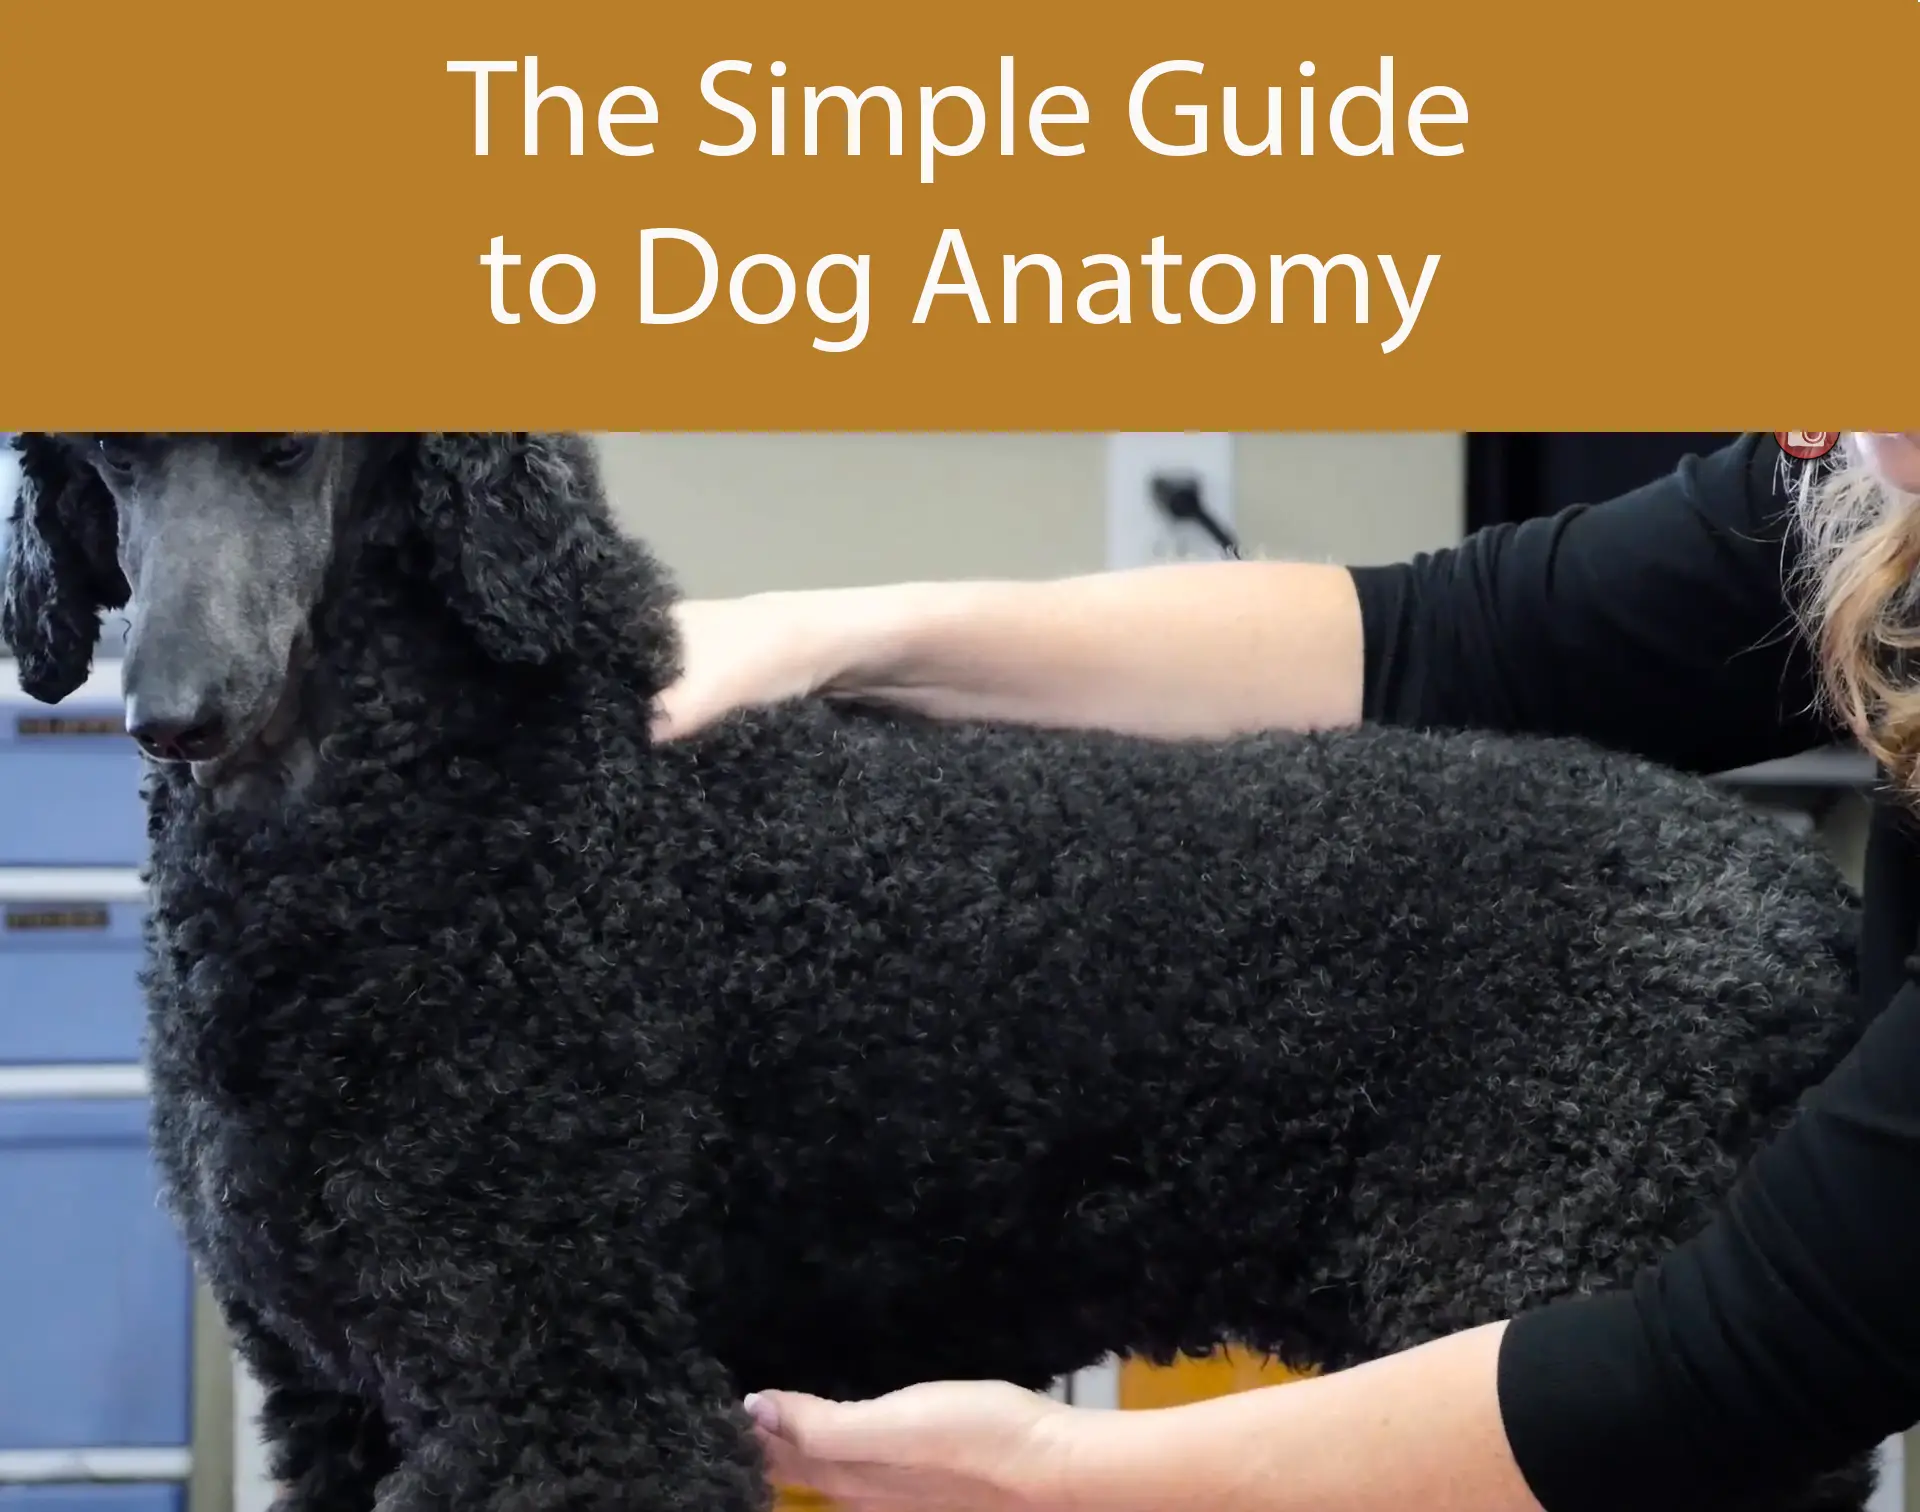 The Simple Guide to Dog Anatomy